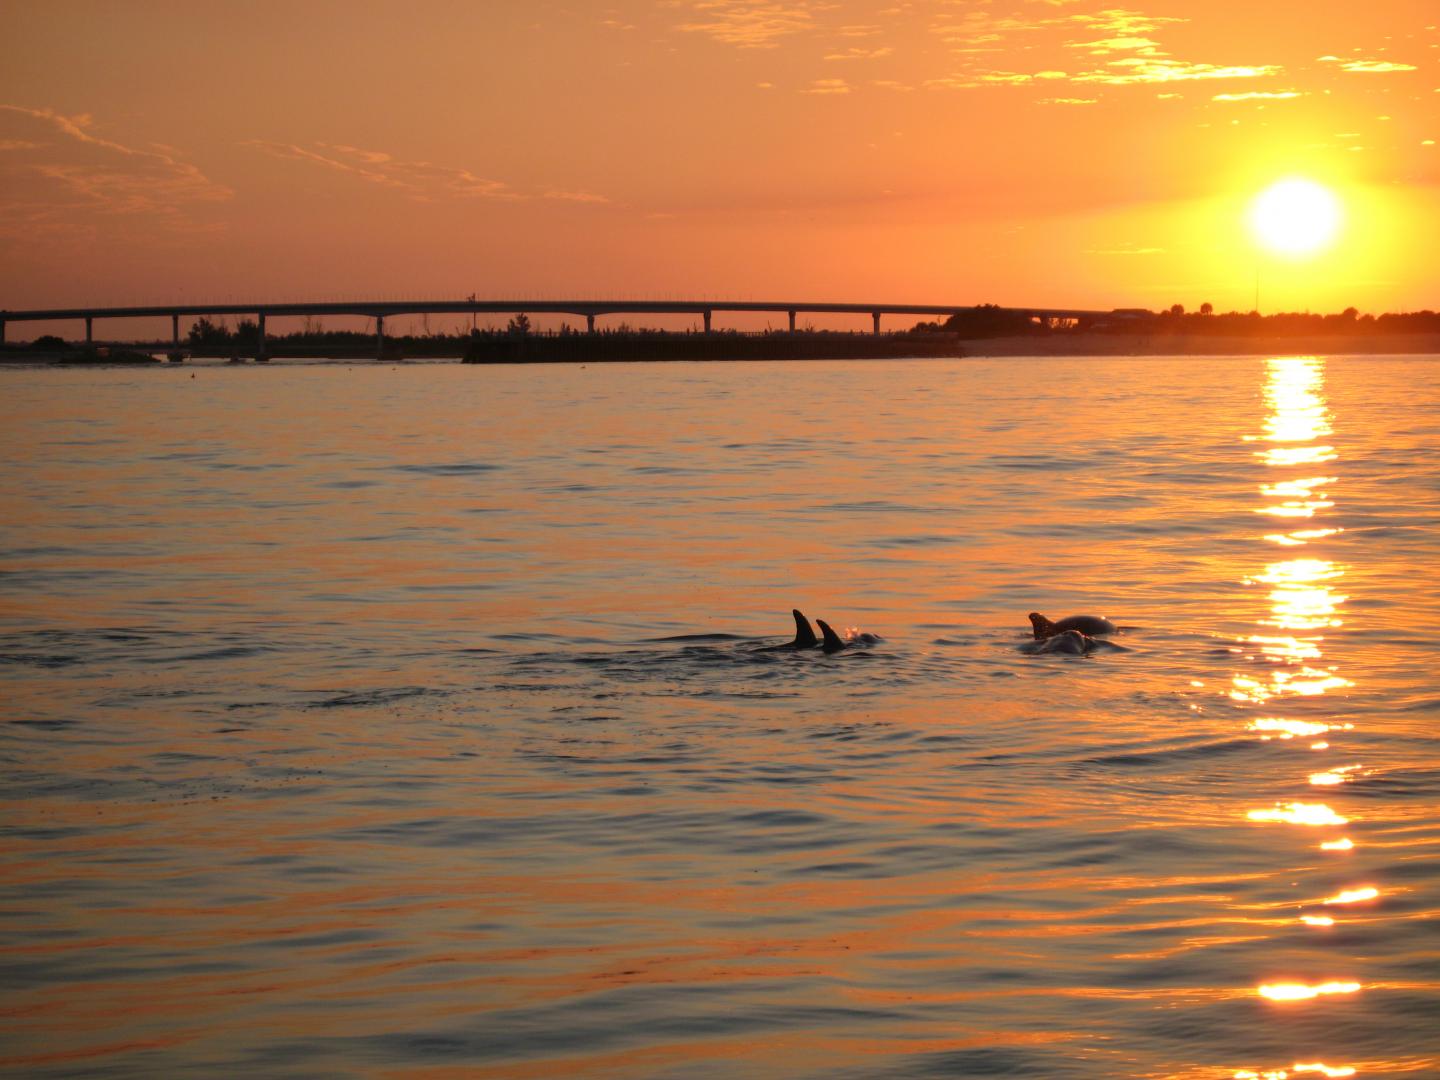 Dolphins at Sunset along the Indian River Lagoon